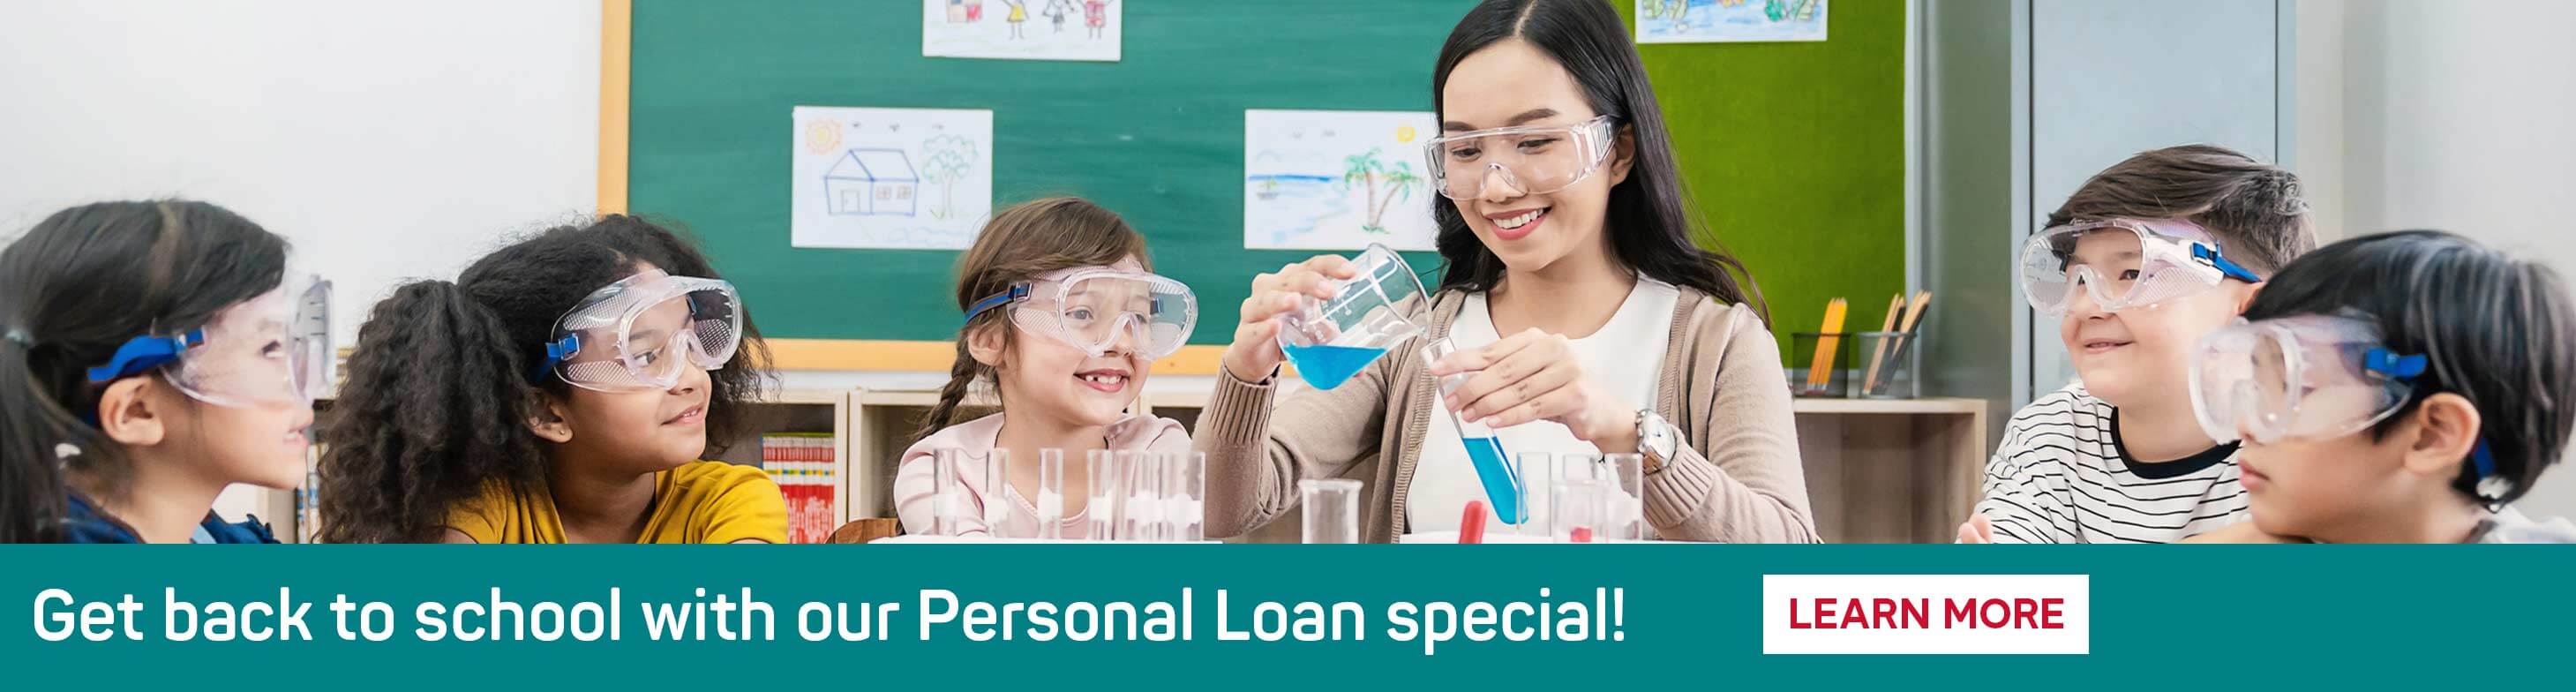 Get back to school with our Personal Loan special!